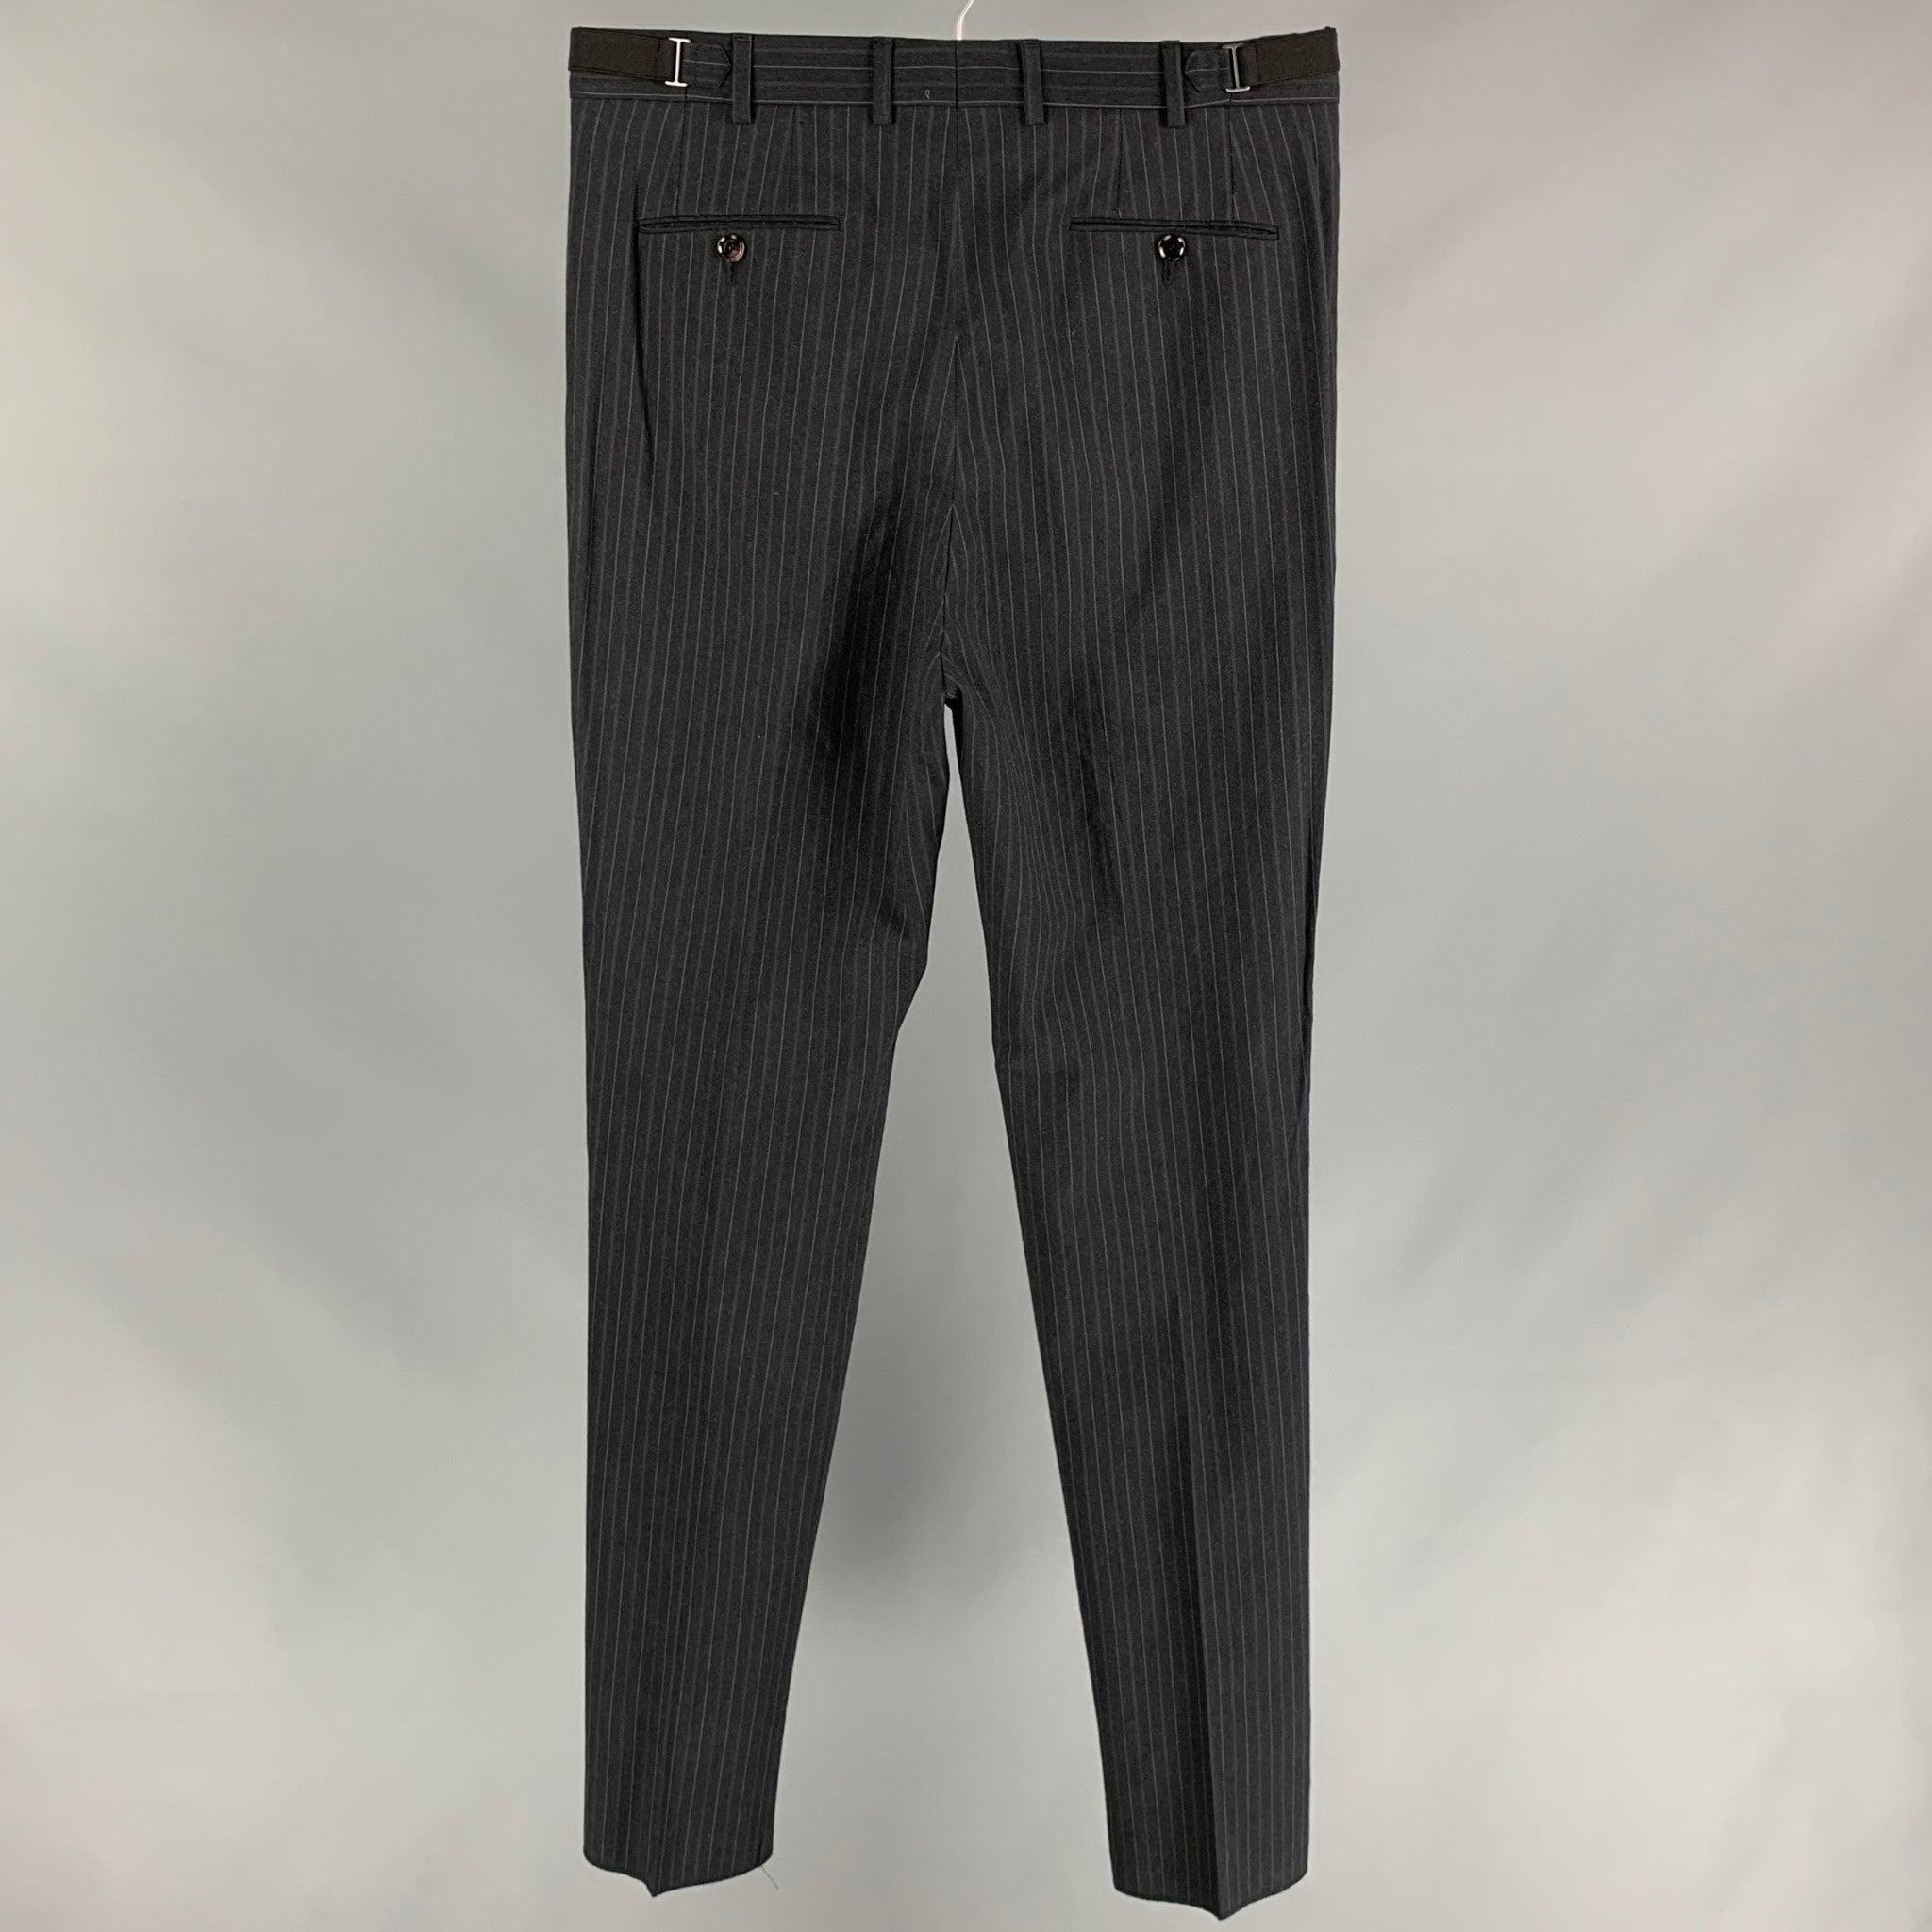 Vintage BURBERRY PRORSUM dress pants comes in a charcoal & grey chalk stripe wool featuring a pleated style, slim fit, adjustable side tabs, front tab, and a zip fly closure. Made in Italy.
Very Good
Pre-Owned Condition. 

Marked:   No size marked. 